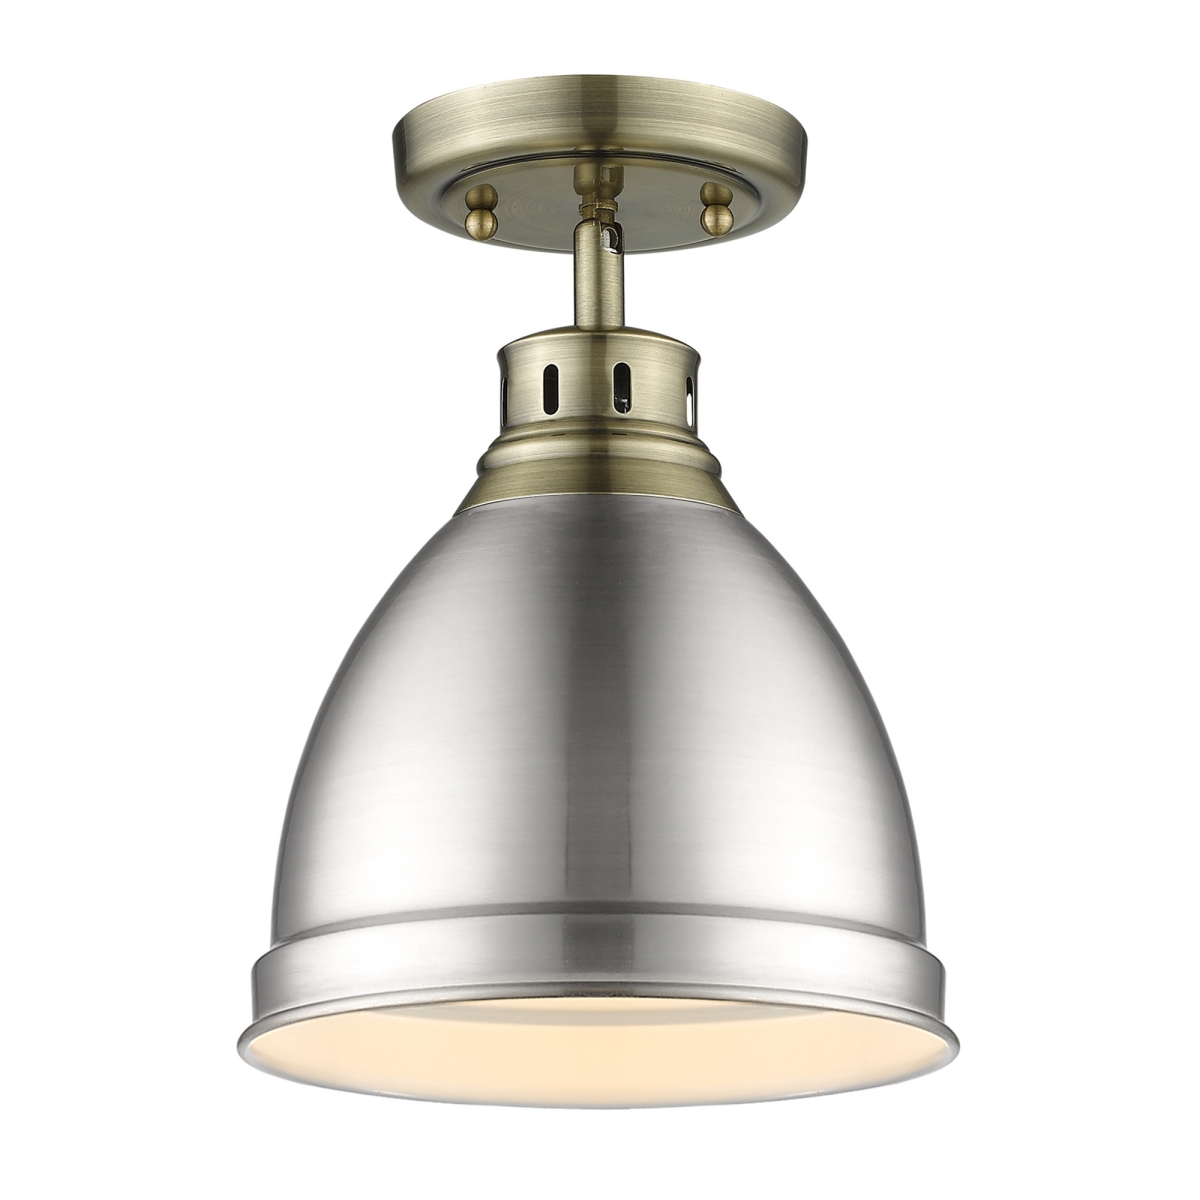 3602-fm Ab-pw Duncan Flush Mount In Aged Brass With A Pewter Shade